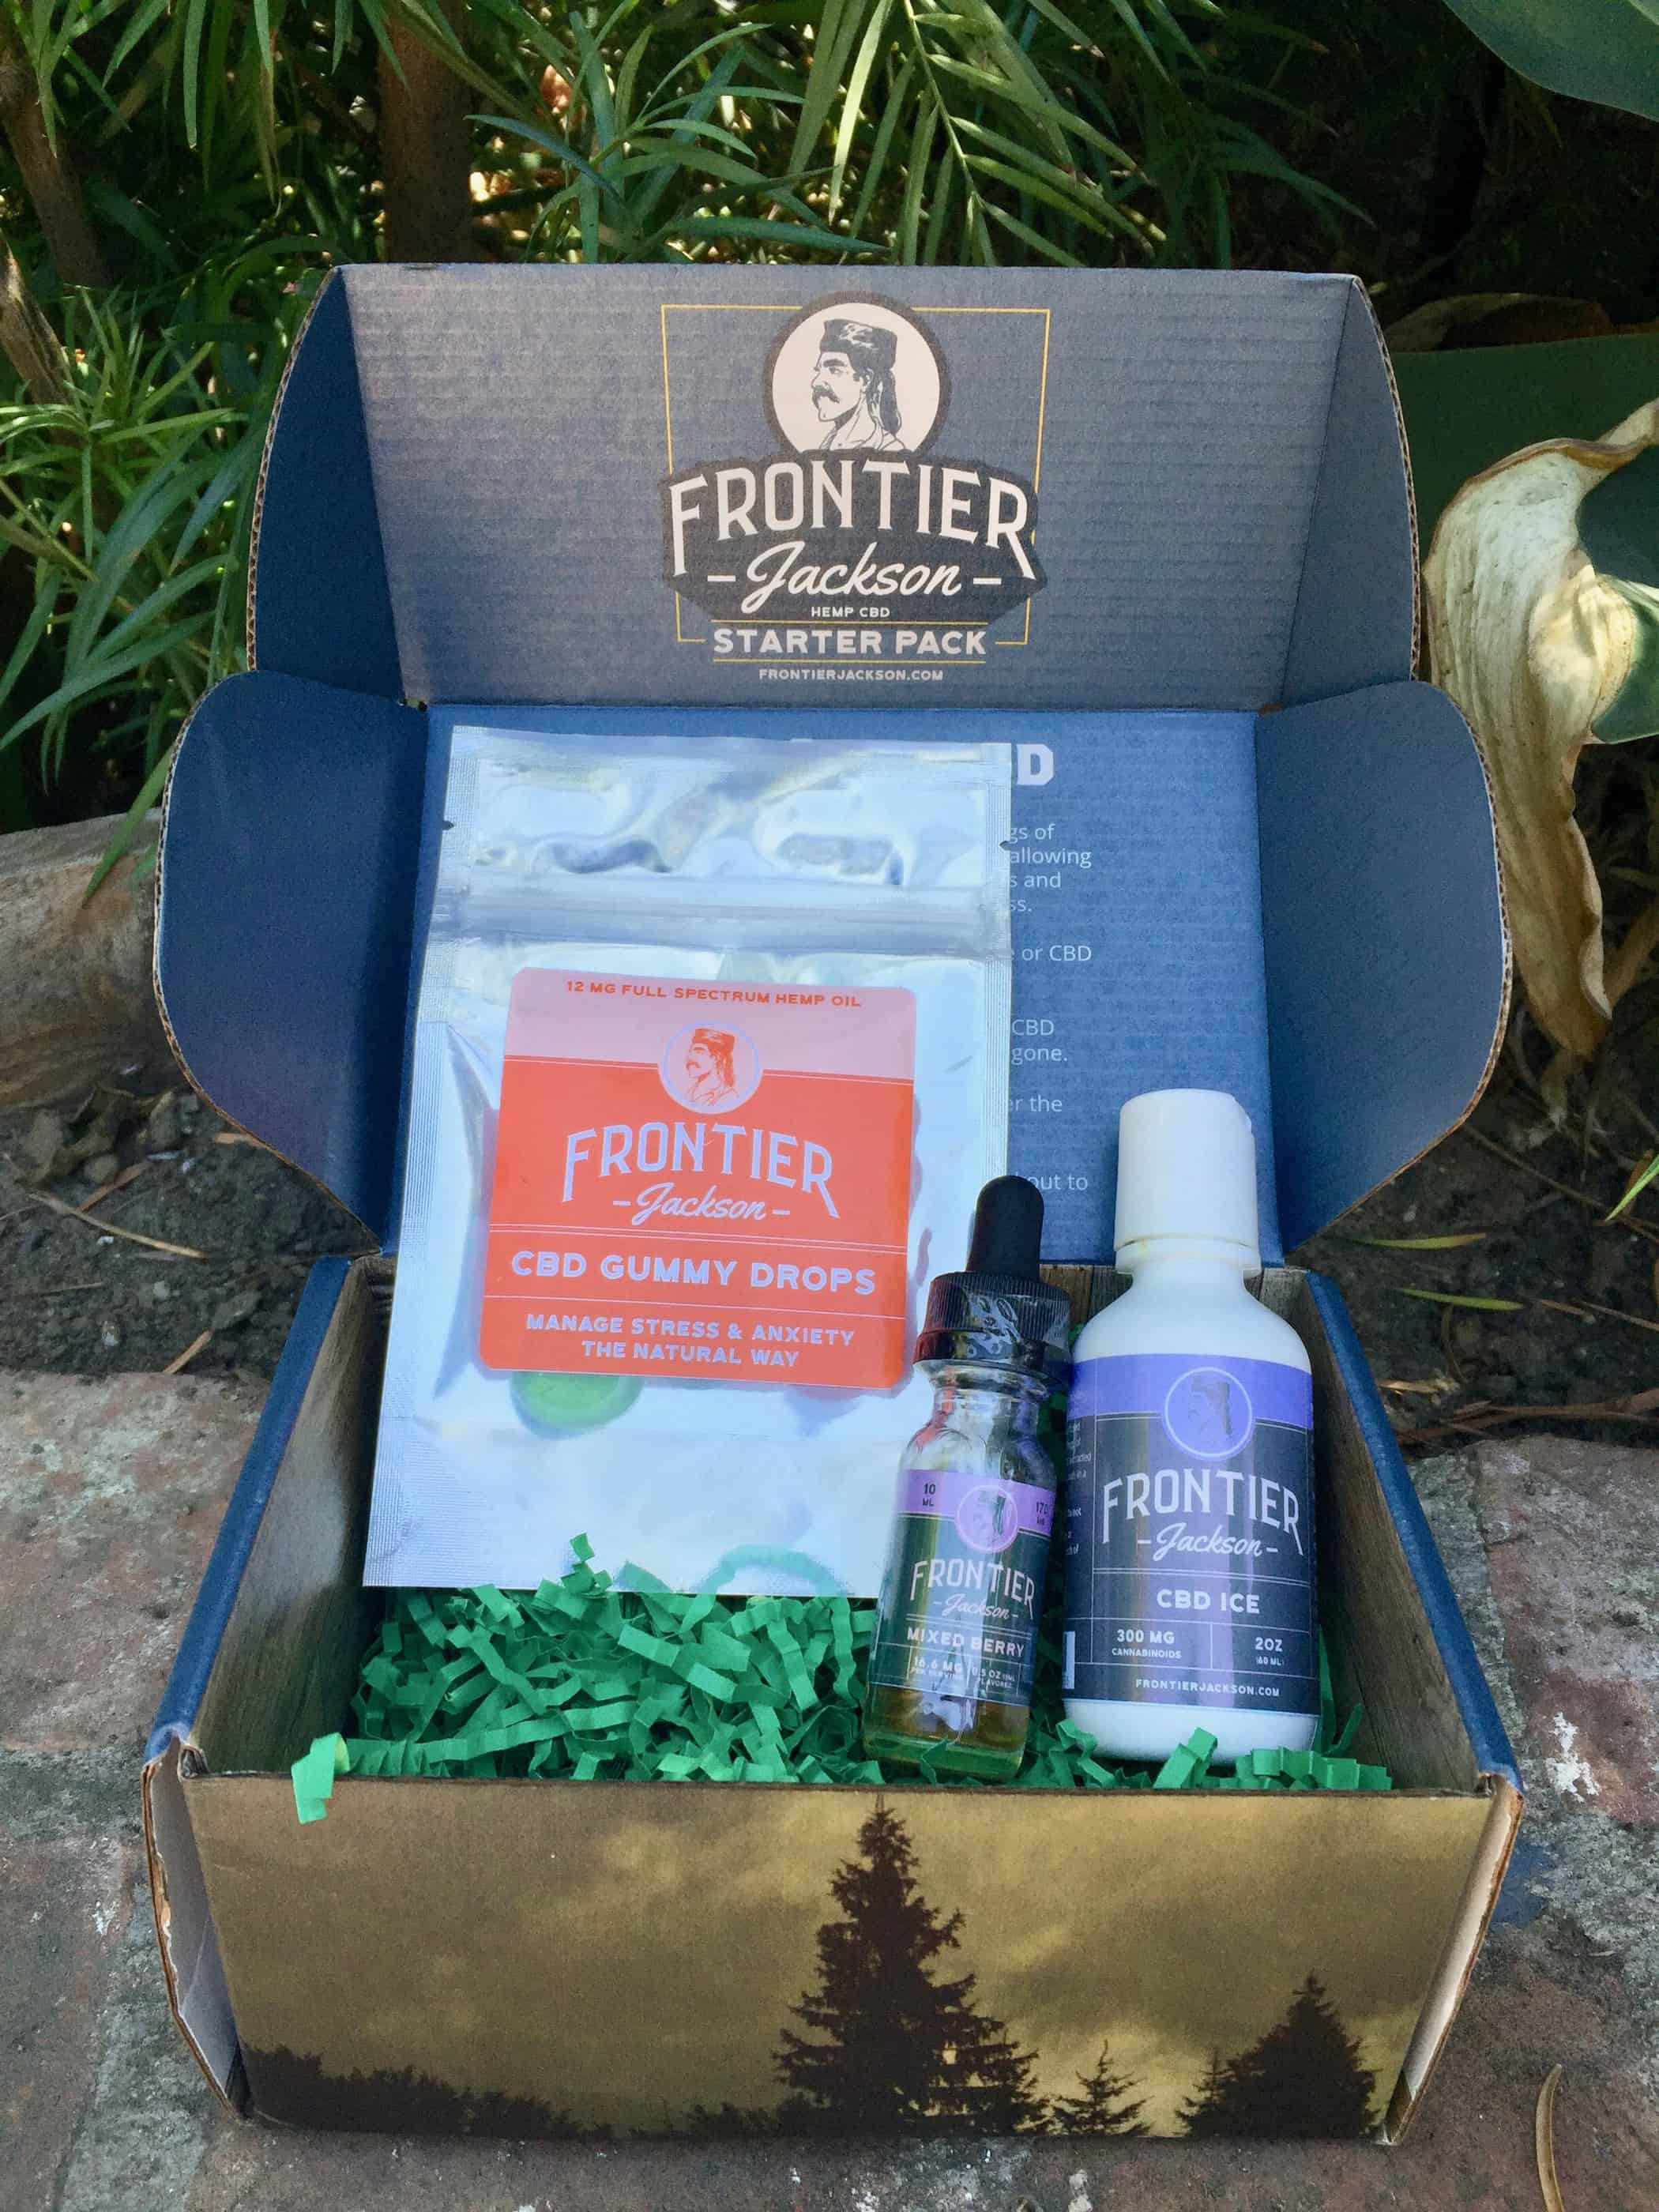 Frontier Jackson review save on cannabis Review 